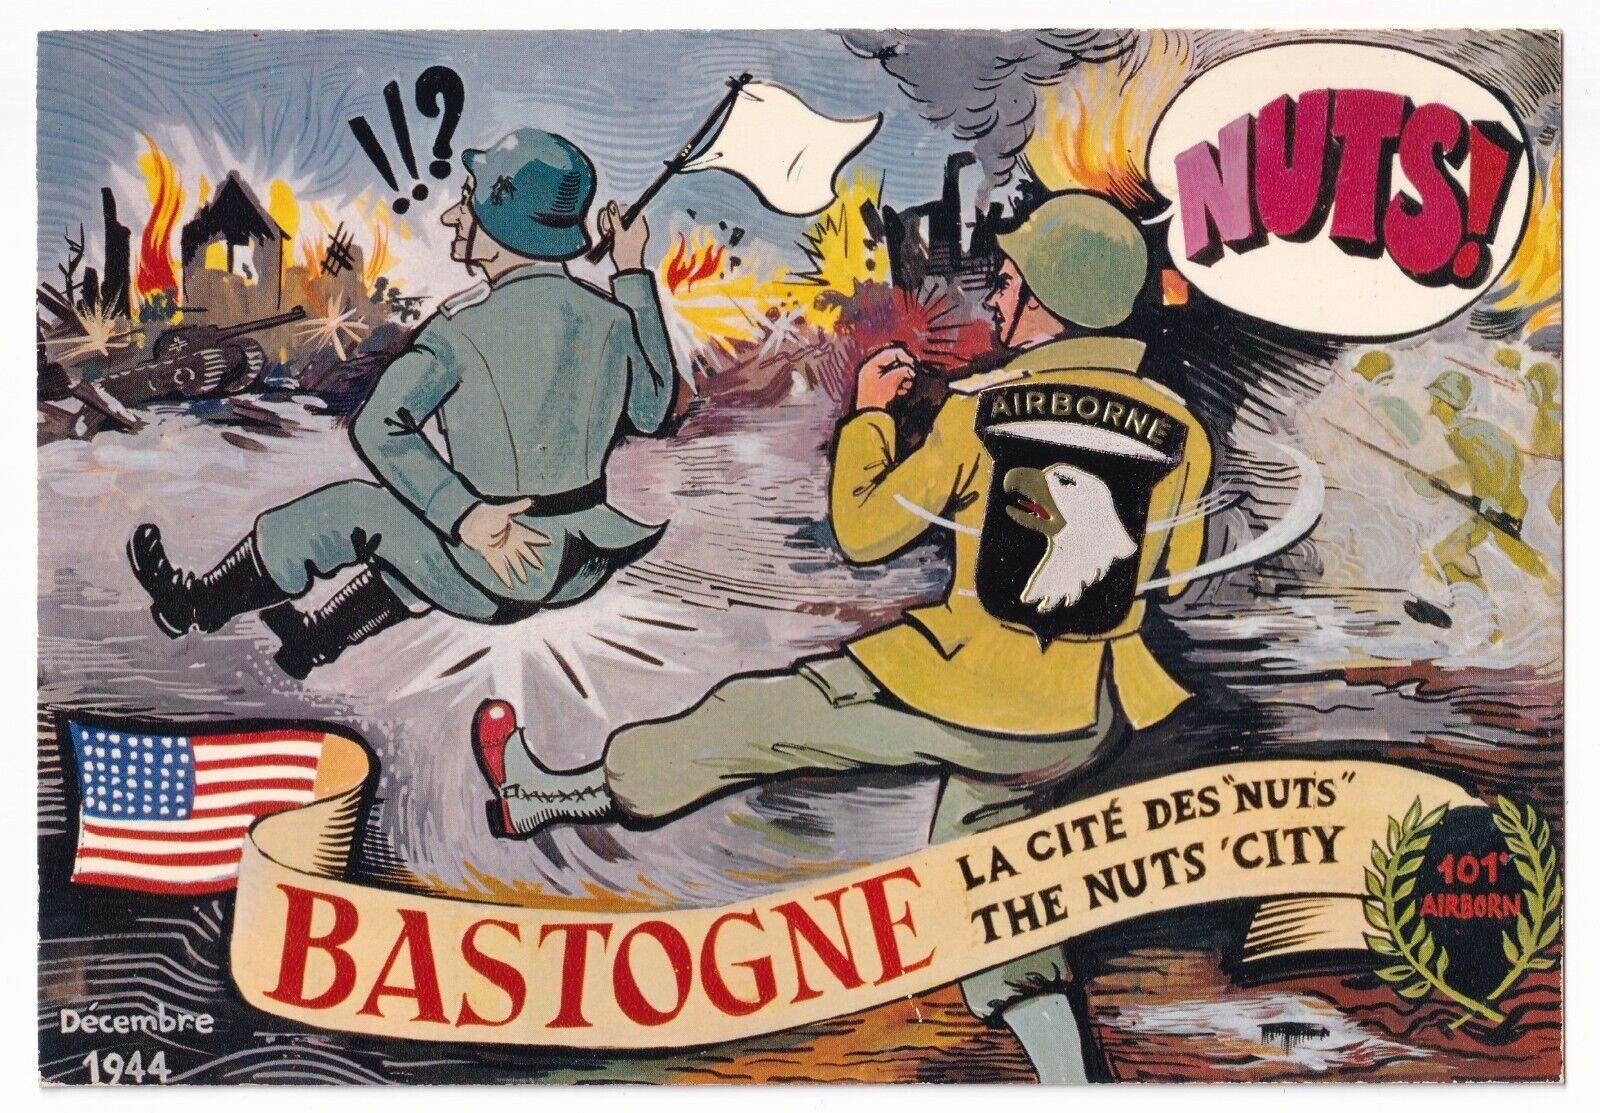 Post Card Bastogne The Nuts City 101st Airborne